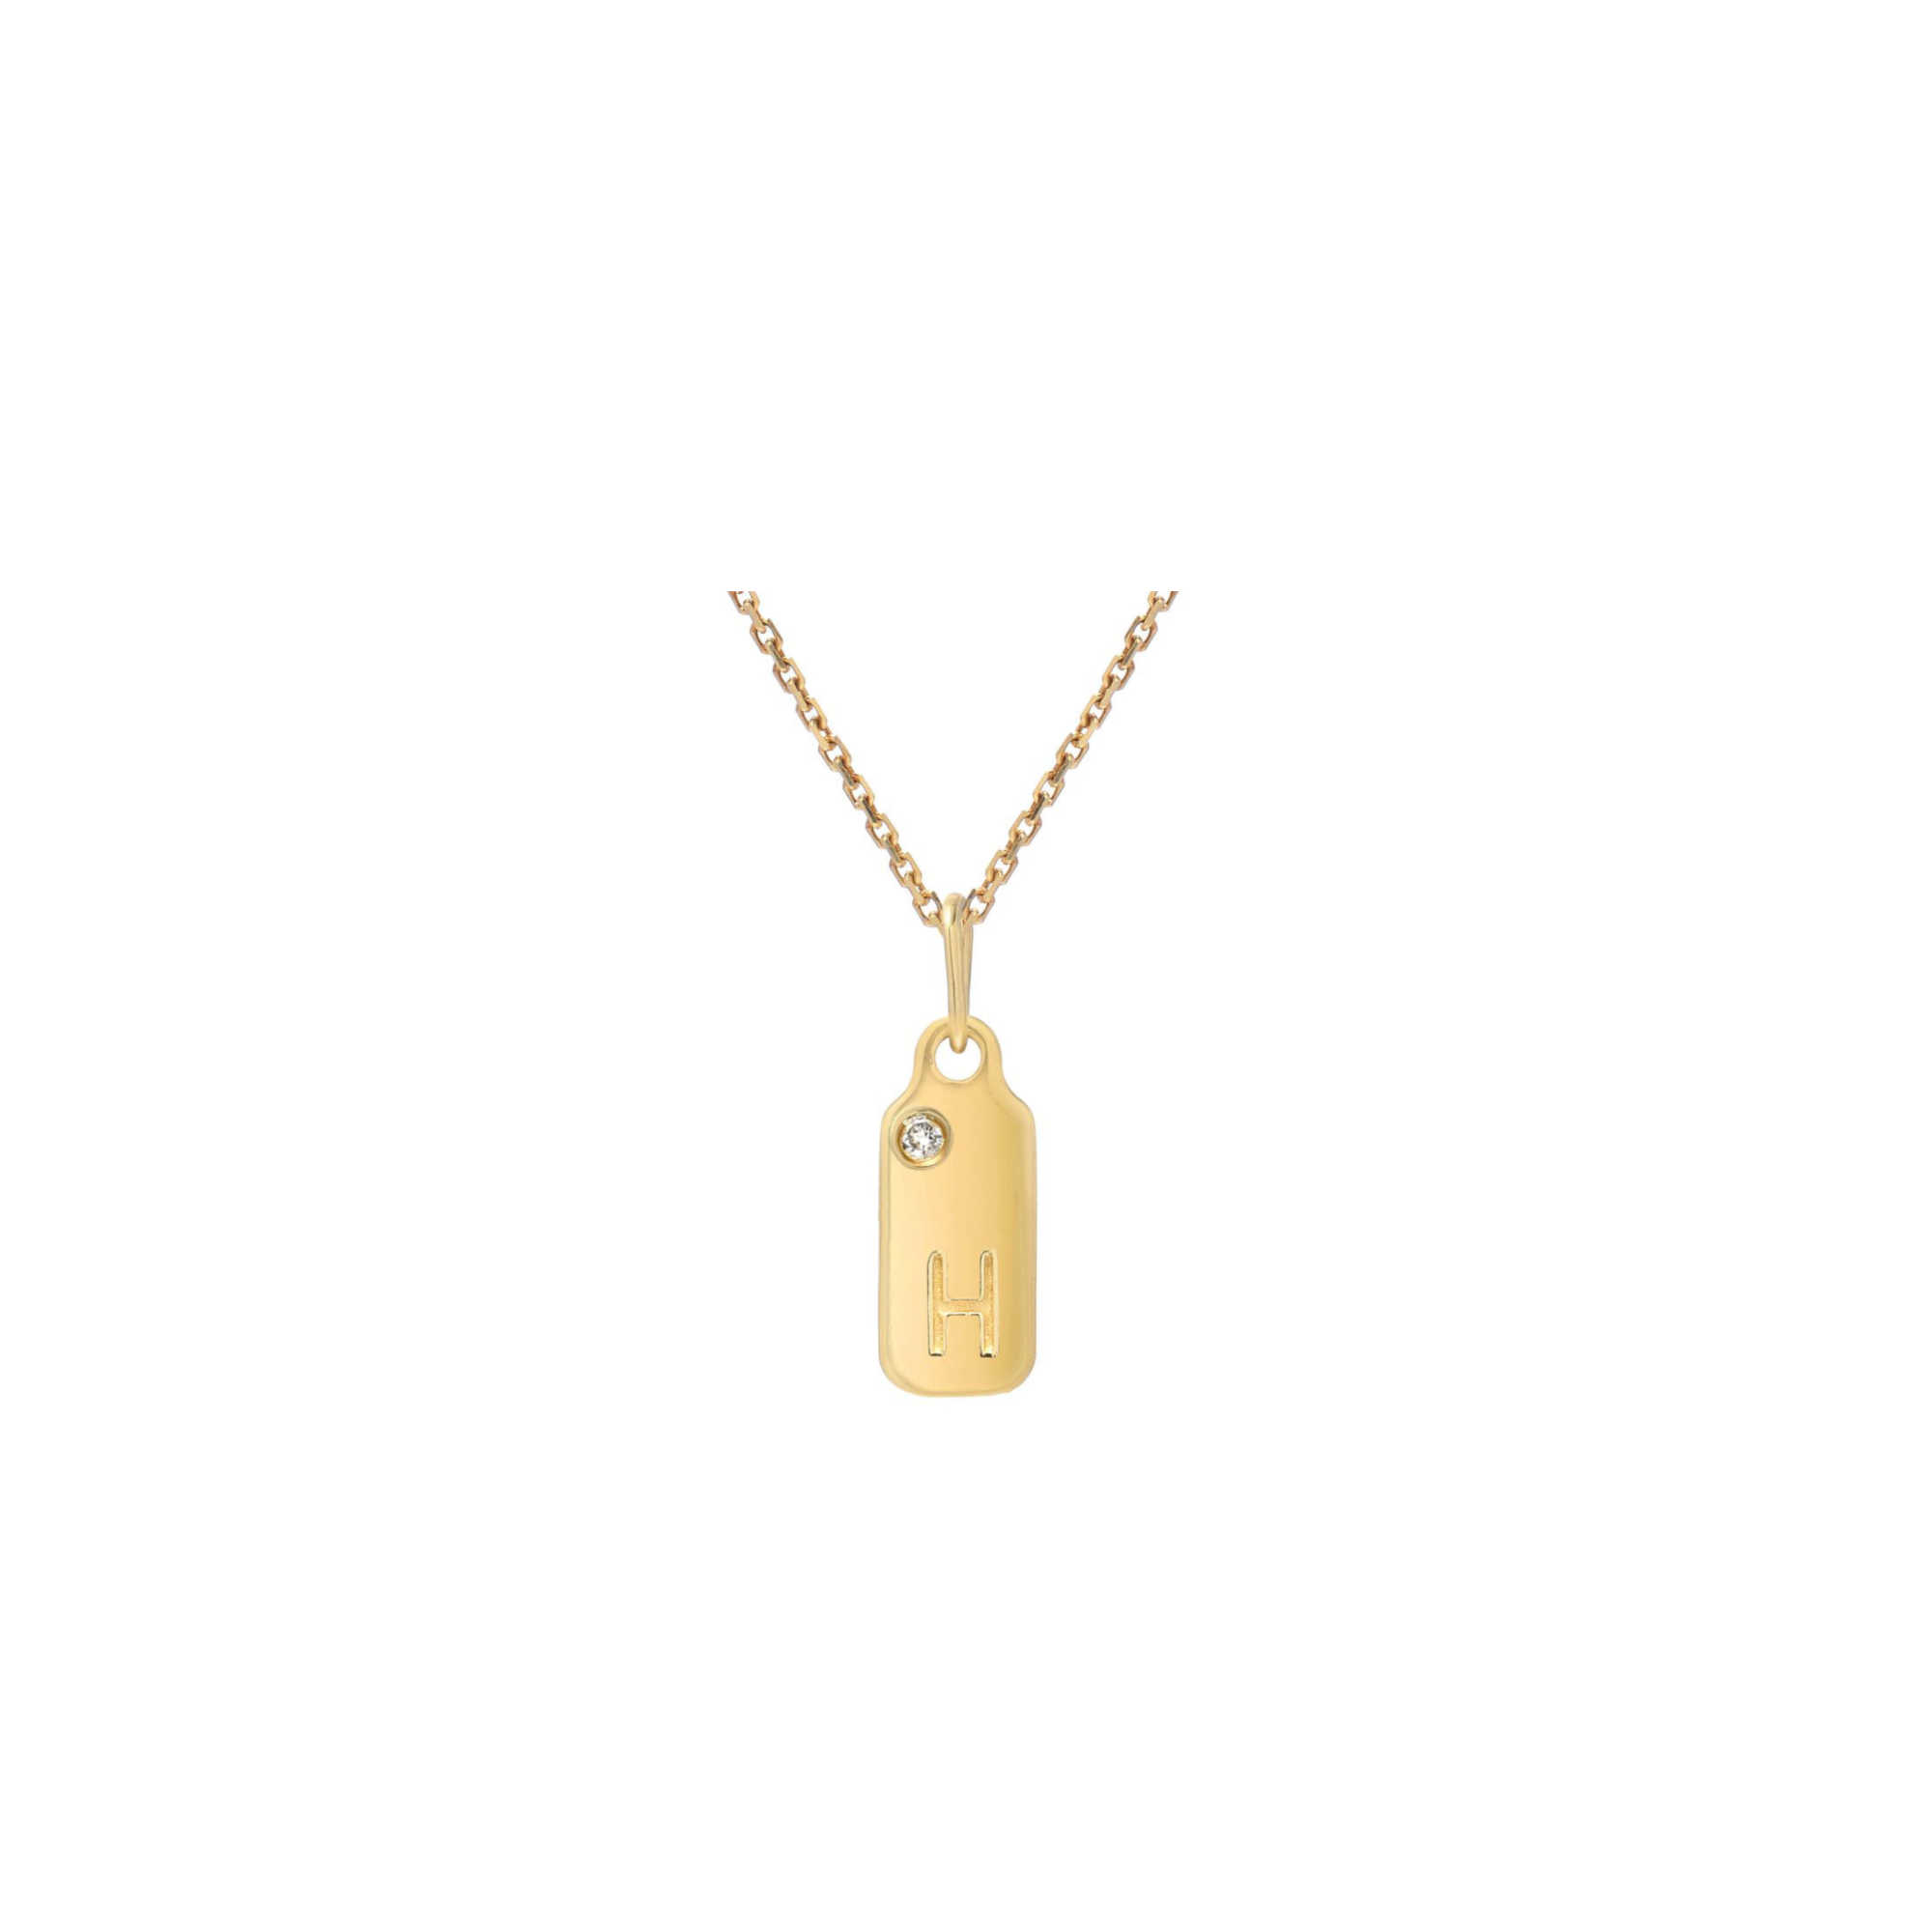 mini dog tag initial necklace